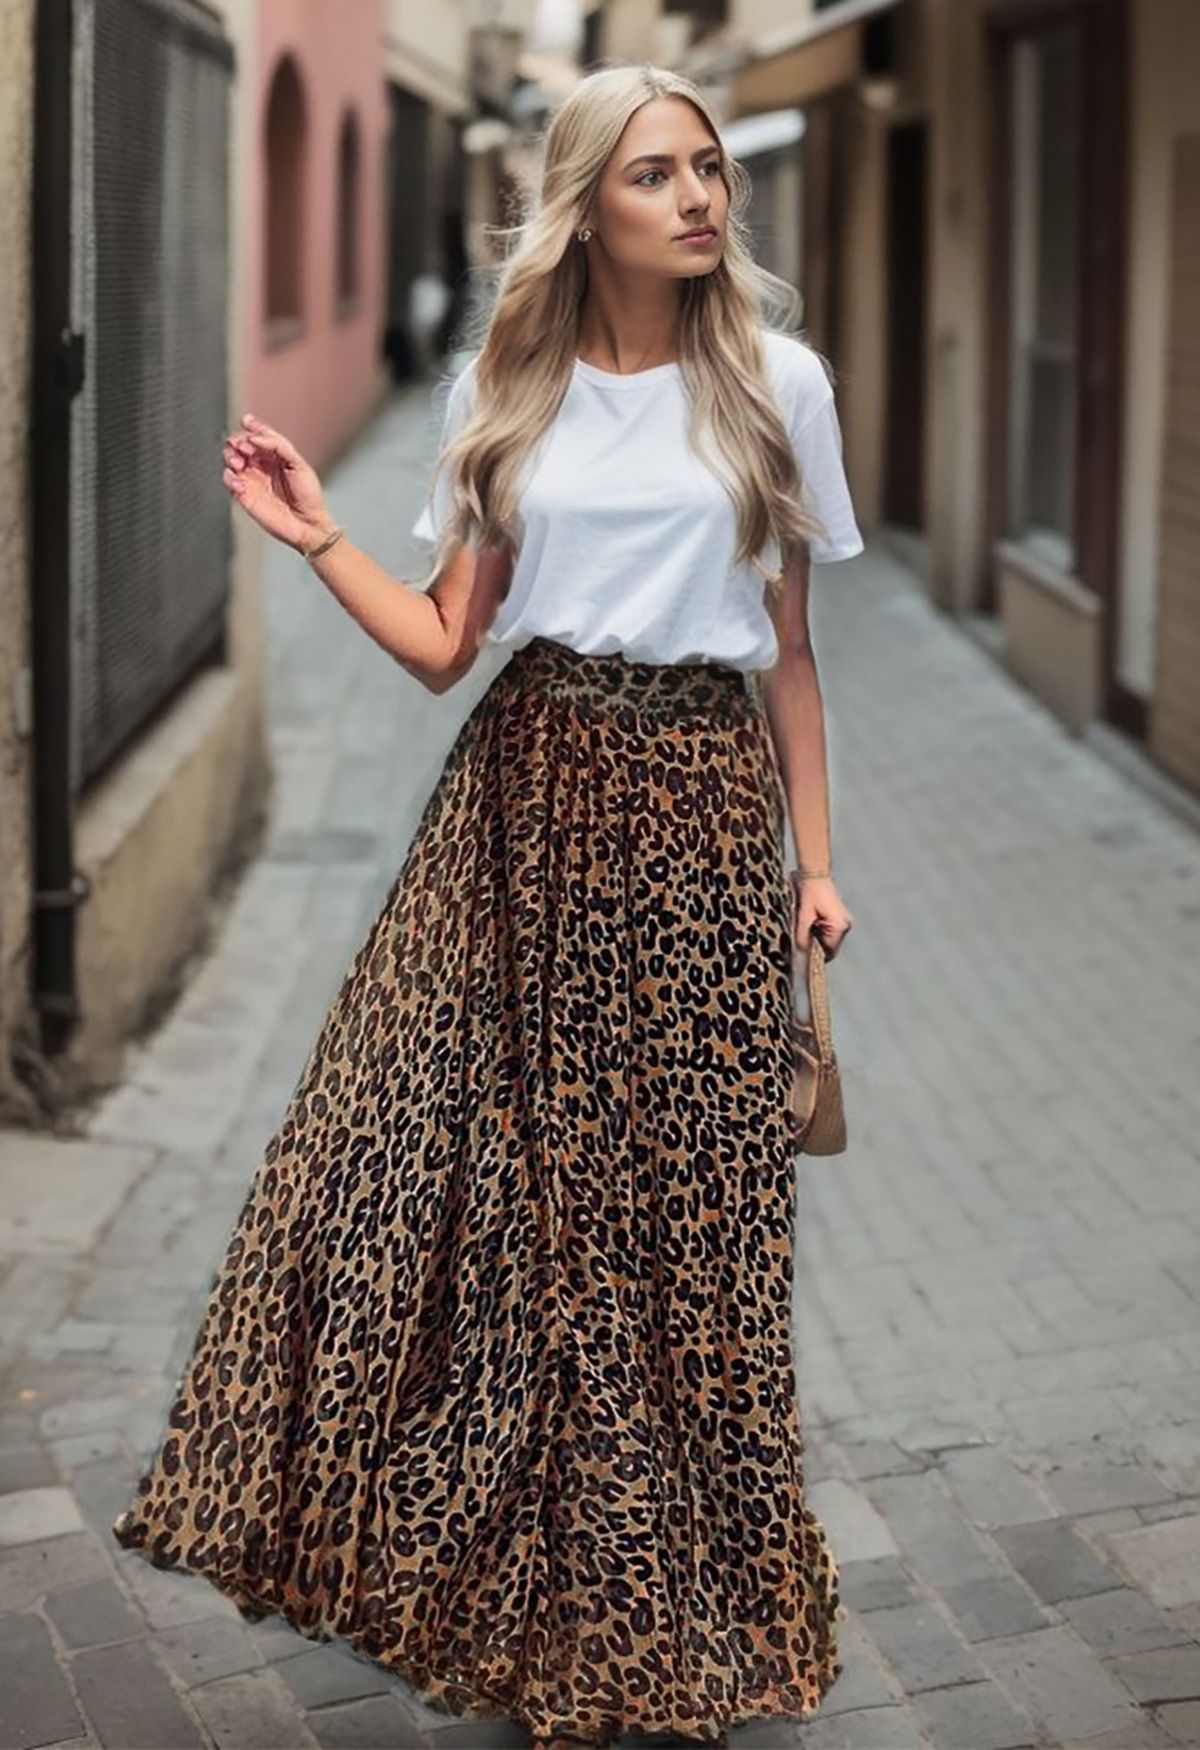 Leopard Watercolor Maxi Skirt in Brown - Retro, Indie and Unique Fashion